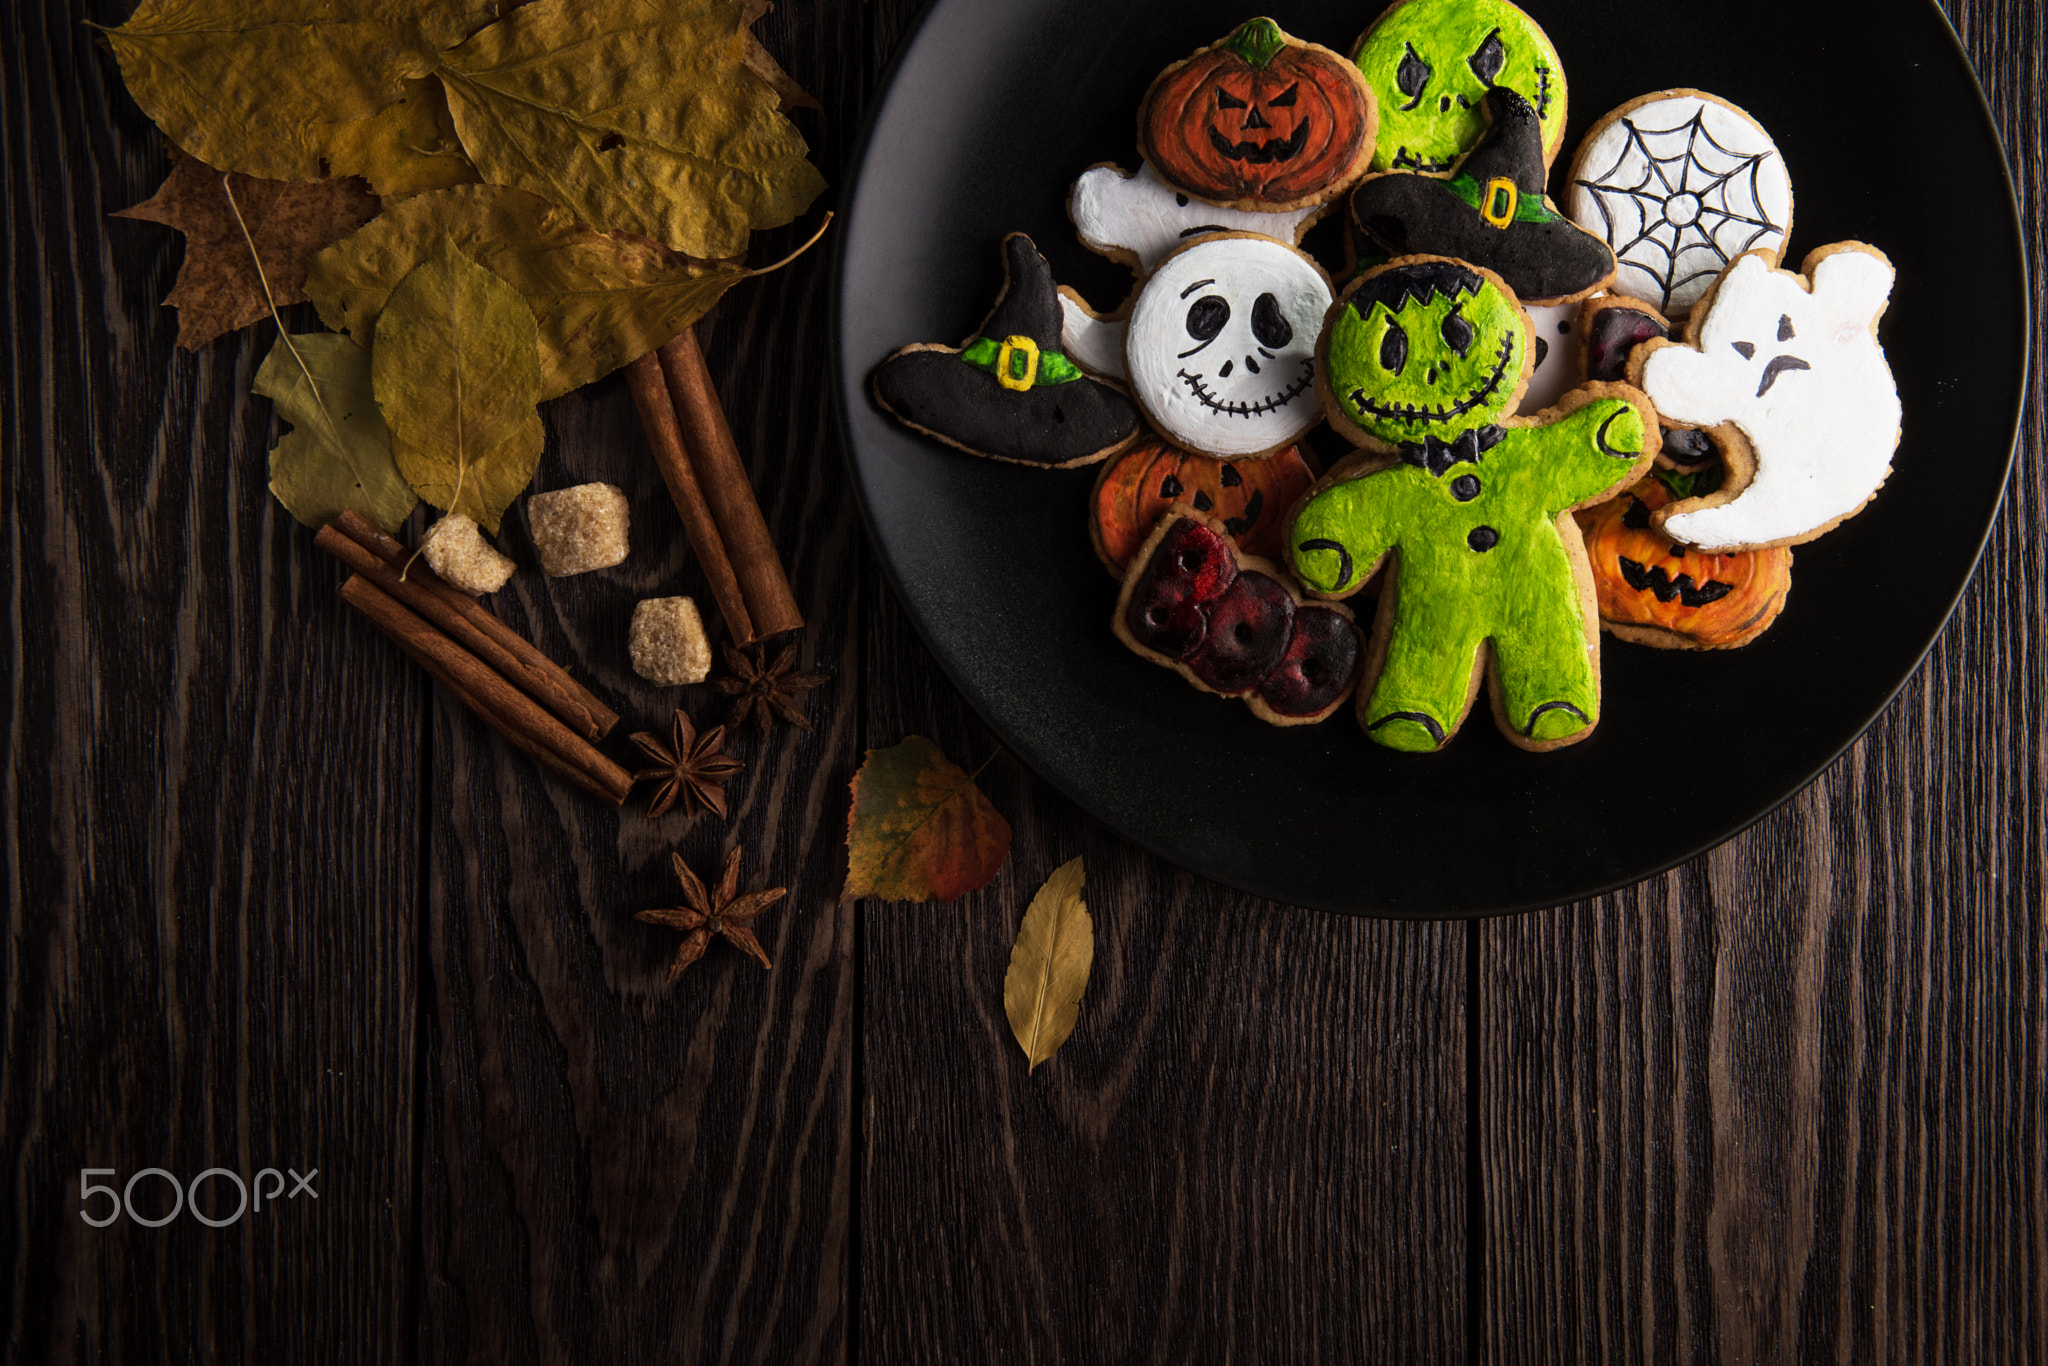 General 2048x1366 Halloween sweets biscuit food 500px watermarked closeup